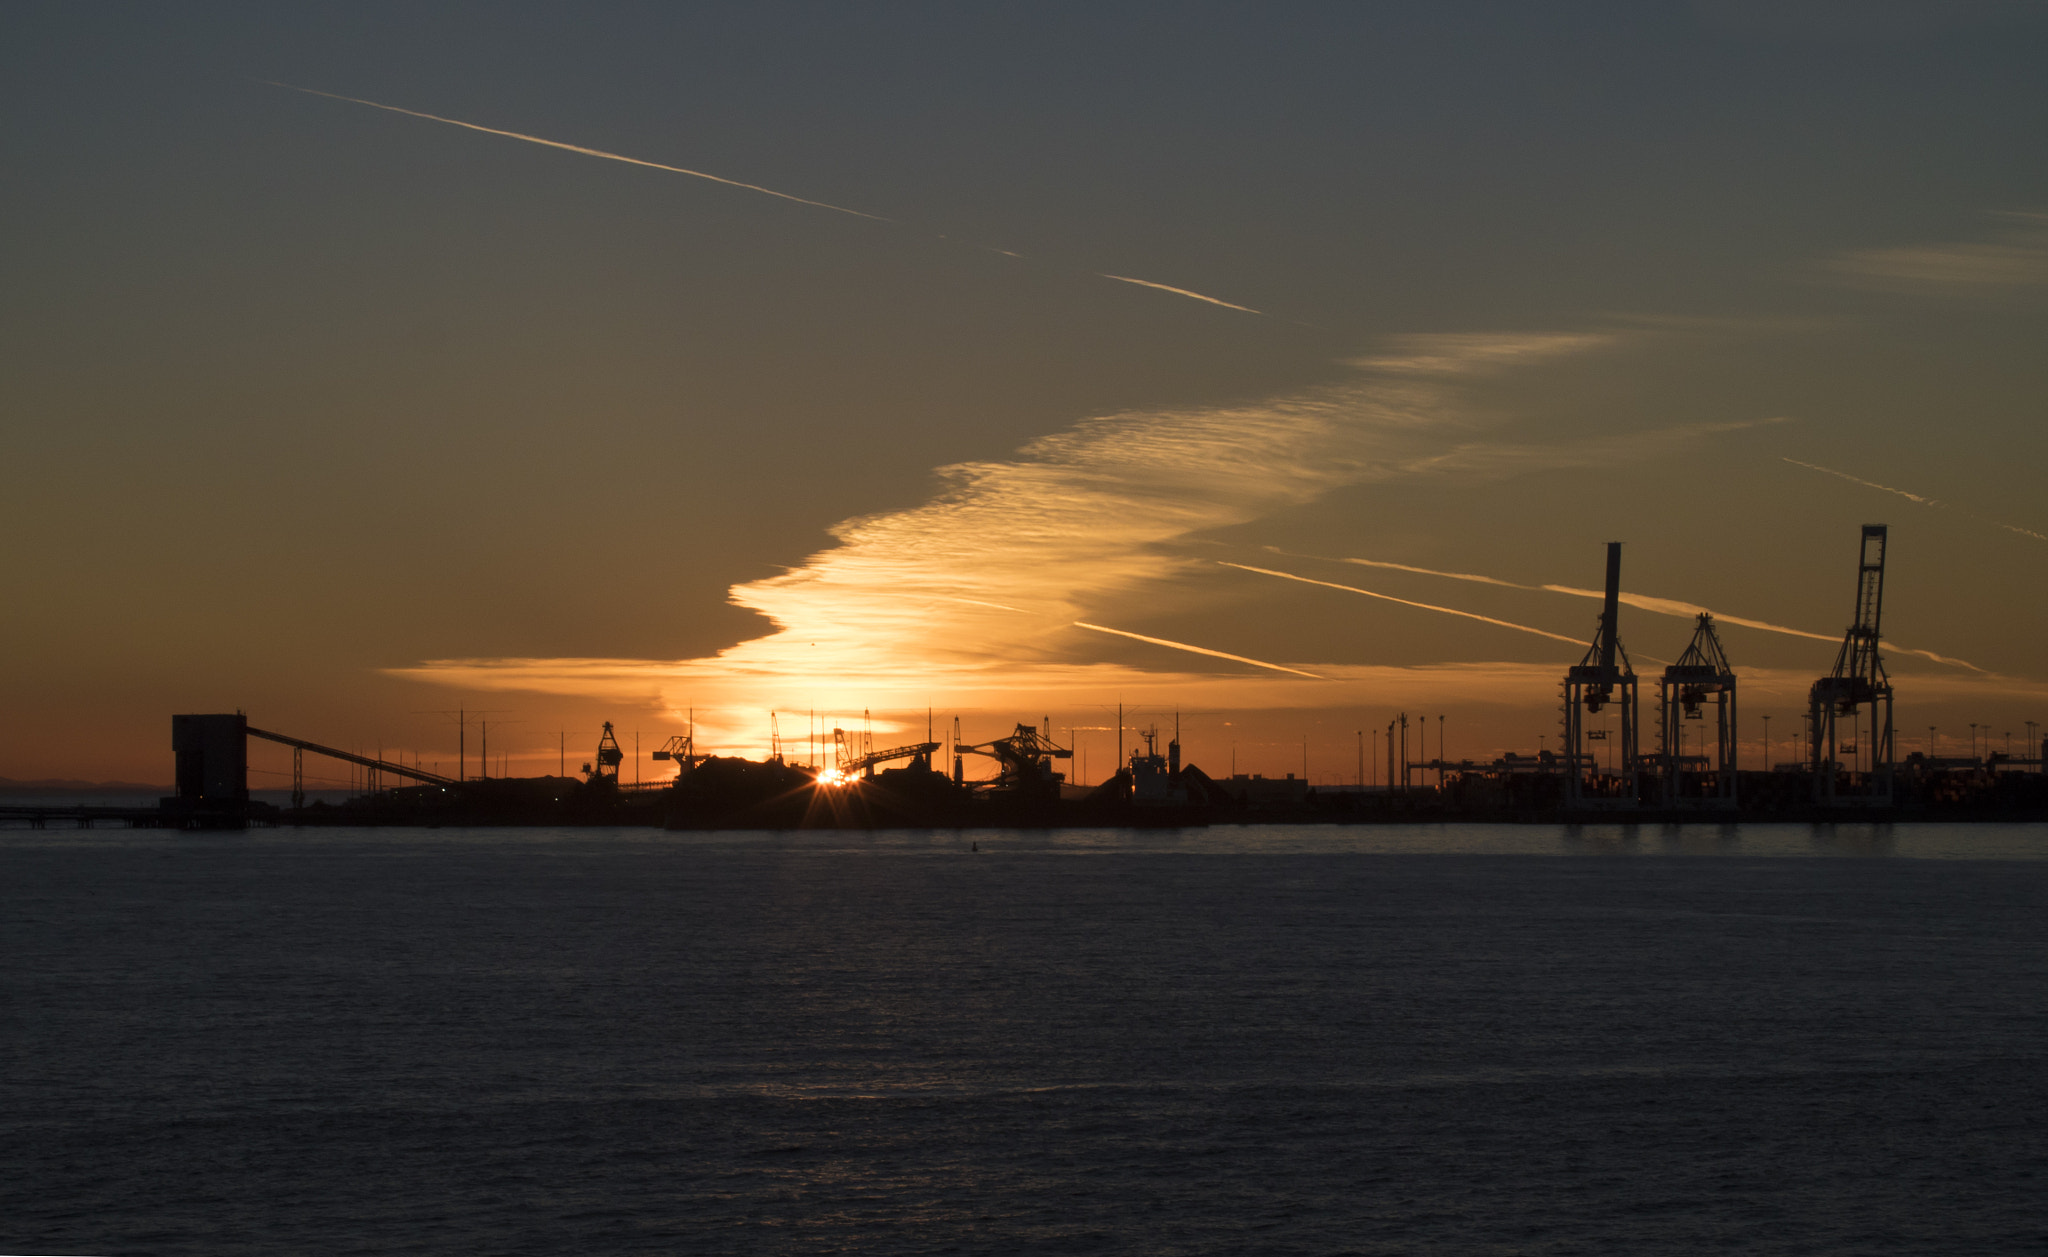 Panasonic Lumix DMC-GH4 + Canon EF 24-105mm F4L IS USM sample photo. Sunset over westshore terminals photography